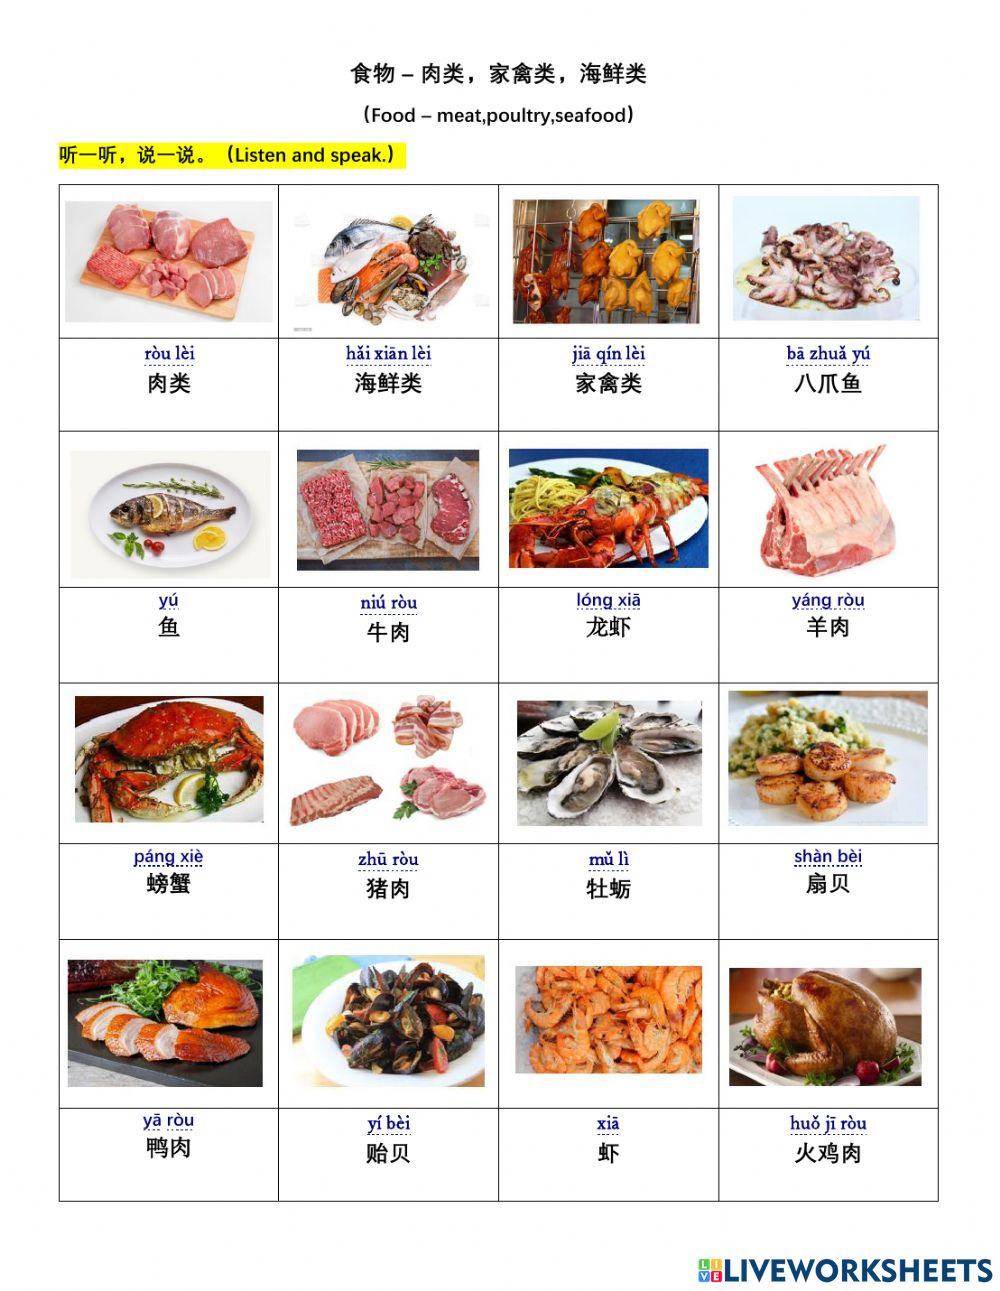 Meat, poultry, seafood in Chinese